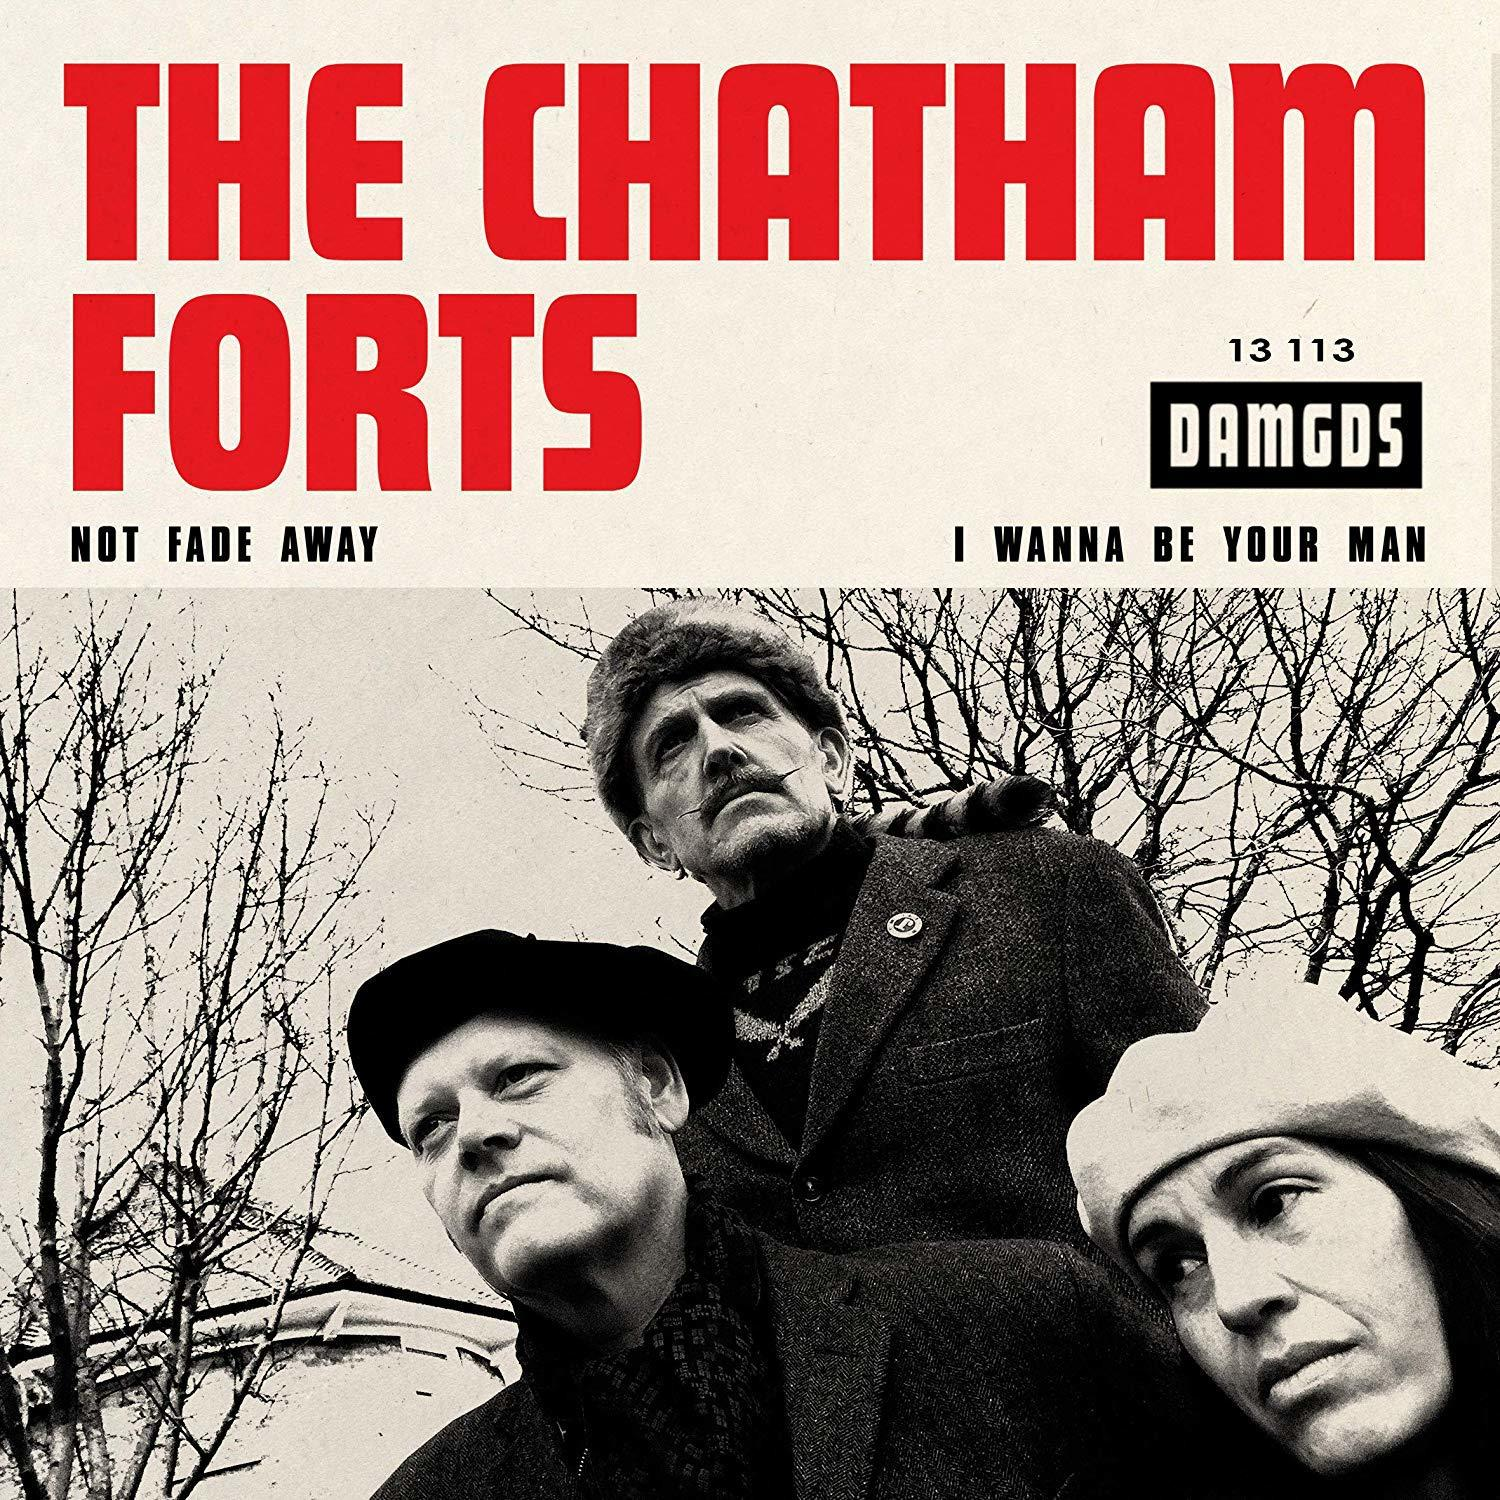 Chatham Forts - - (Vinyl) fade not away